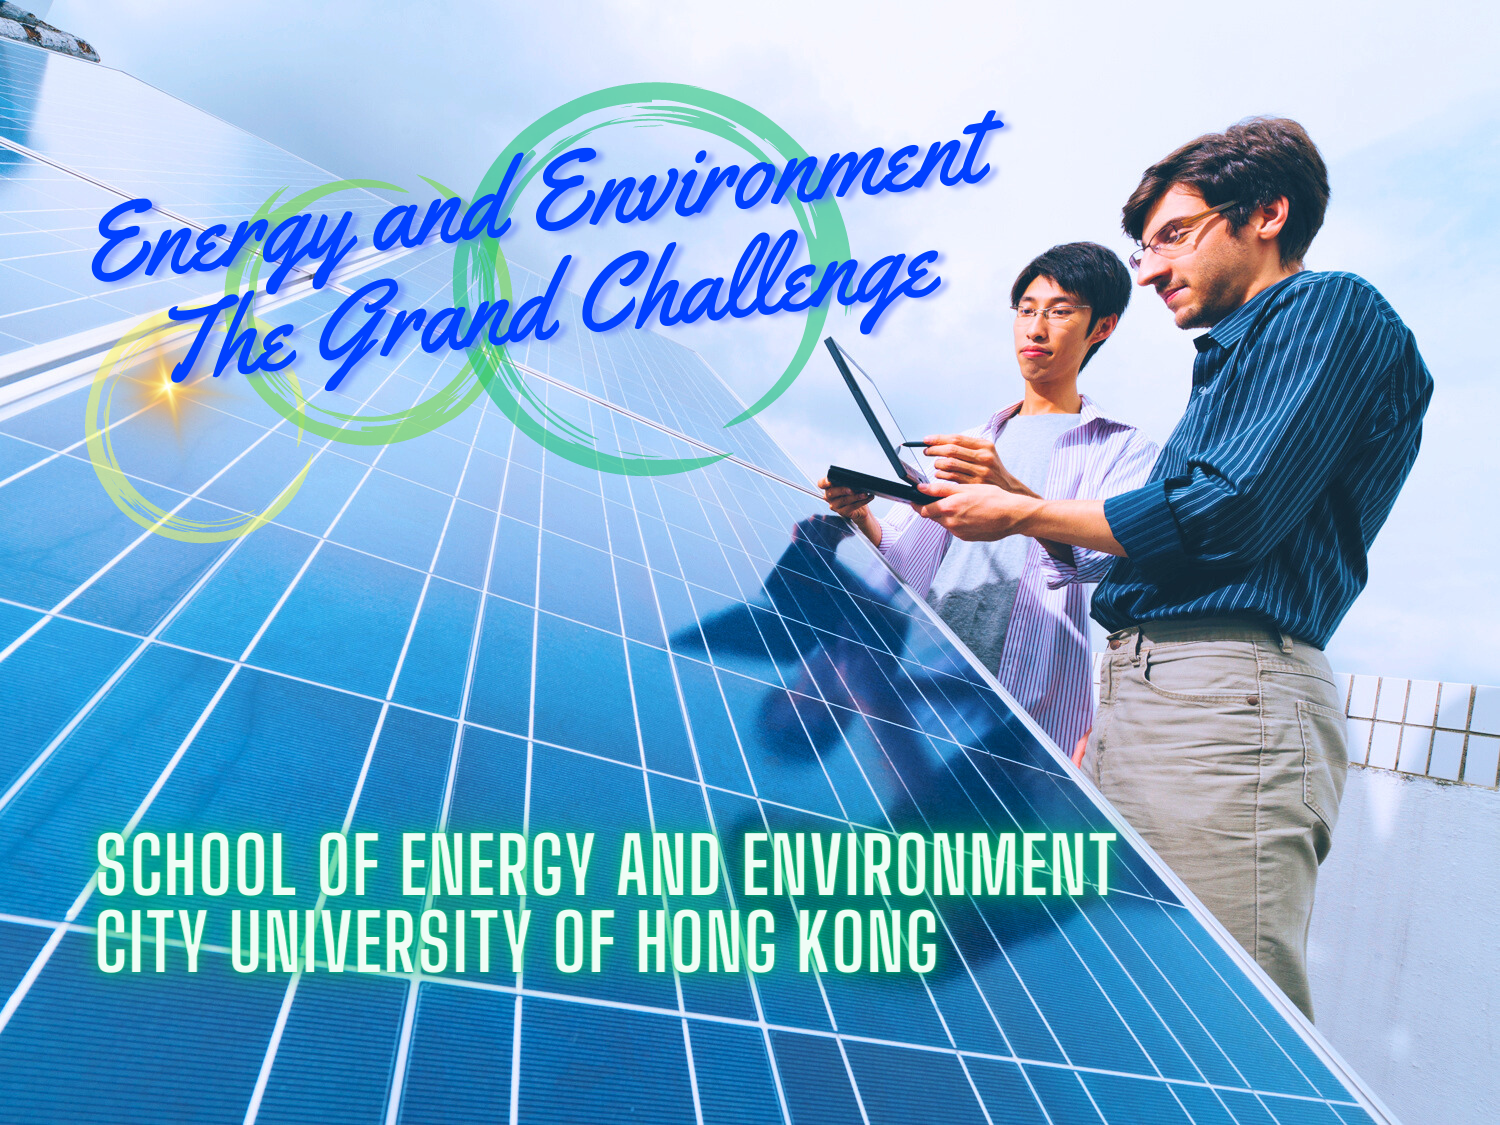 [SEE] Energy and Environment: The Grand Challenge